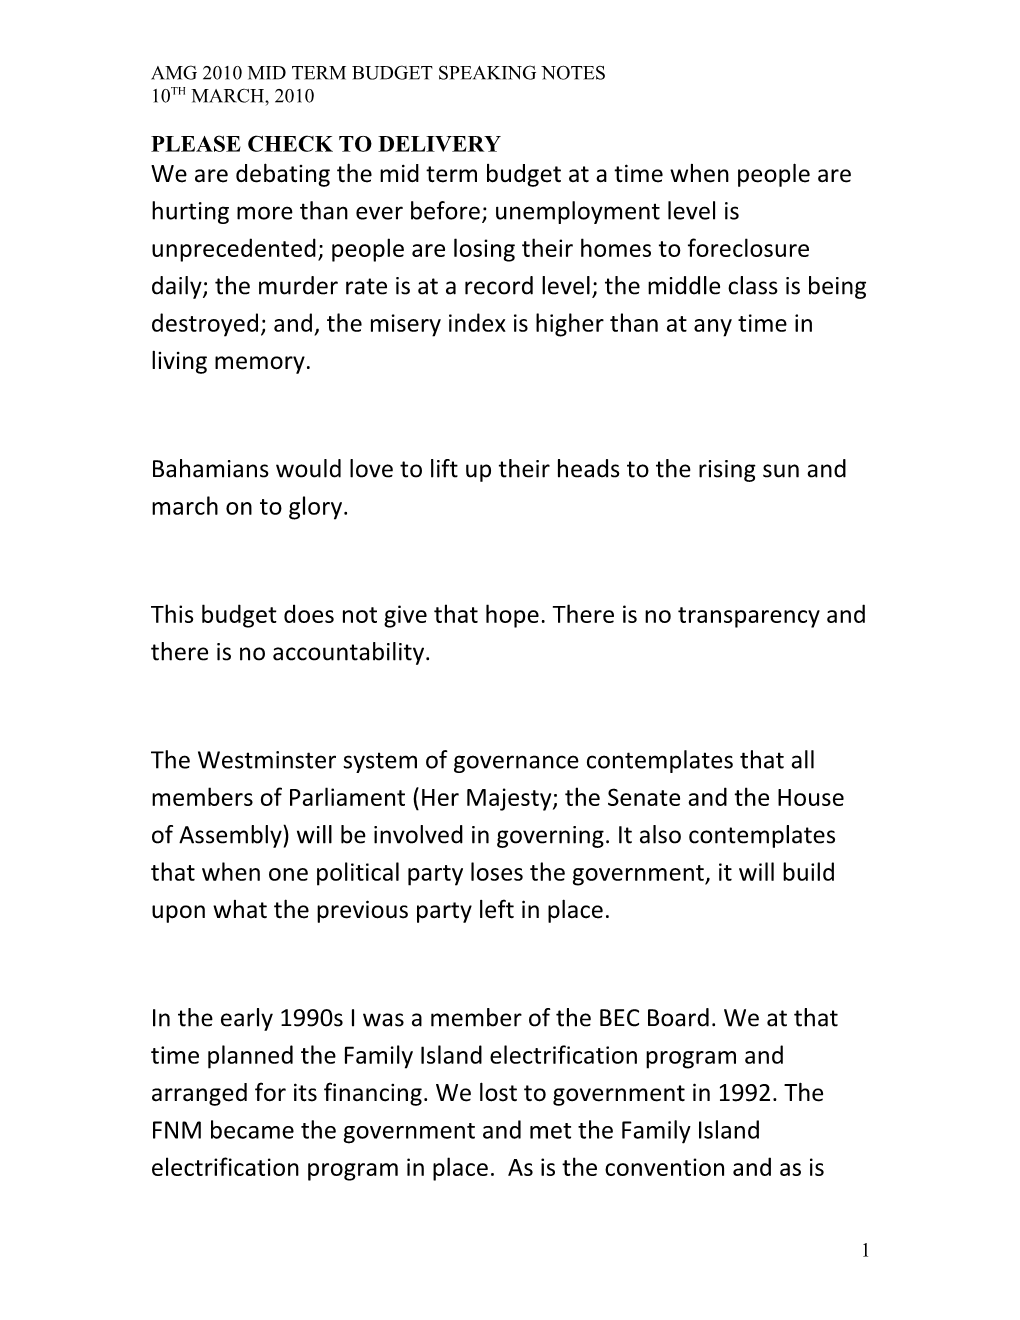 We Are Debating the Mid Term Budget at a Time When People Are Hurting More Than Ever Before;